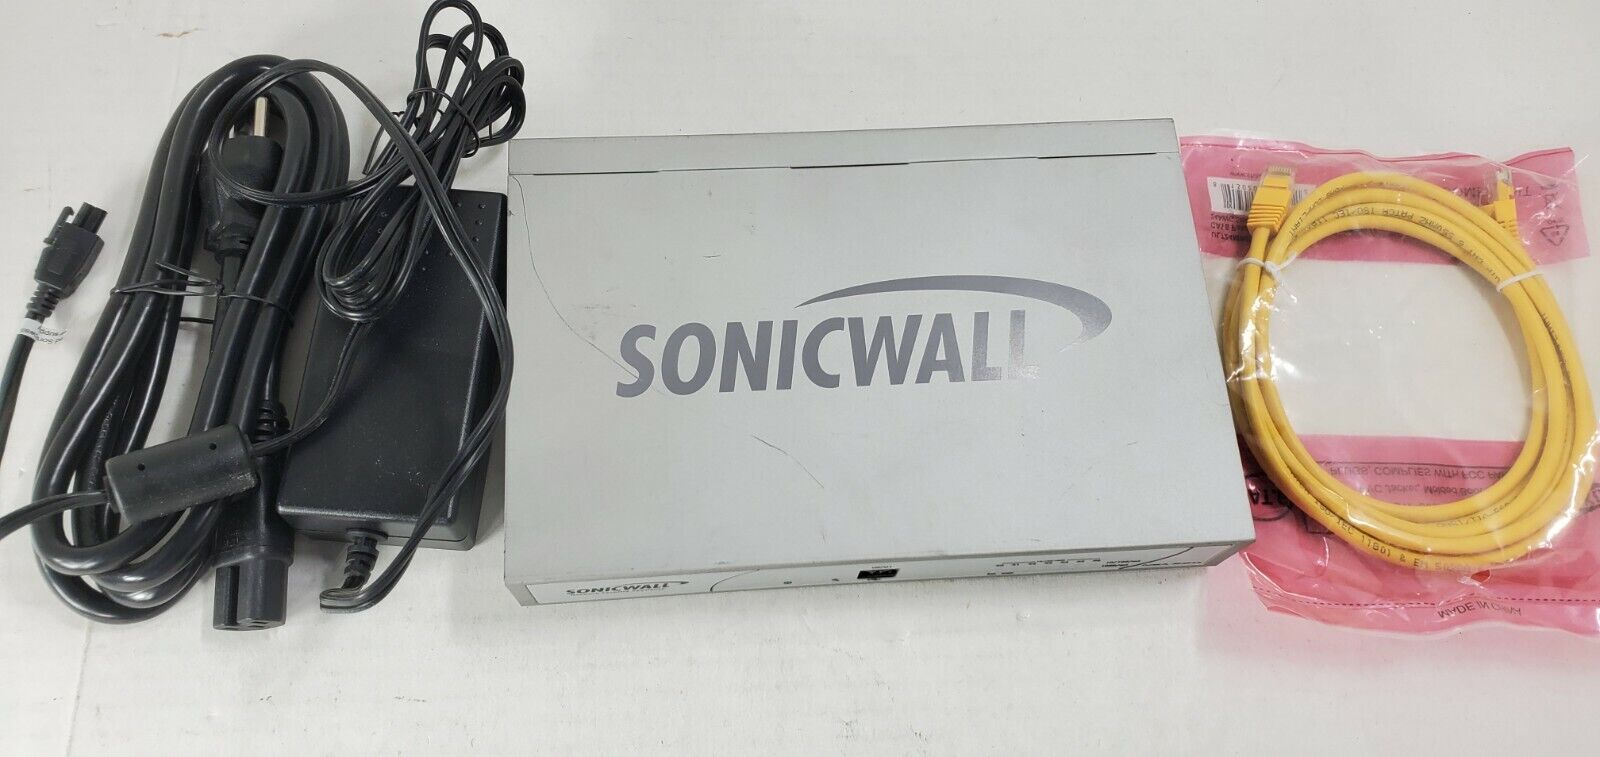 SonicWALL NSA220 APL24-08E VPN Firewall Security Appliance TESTED